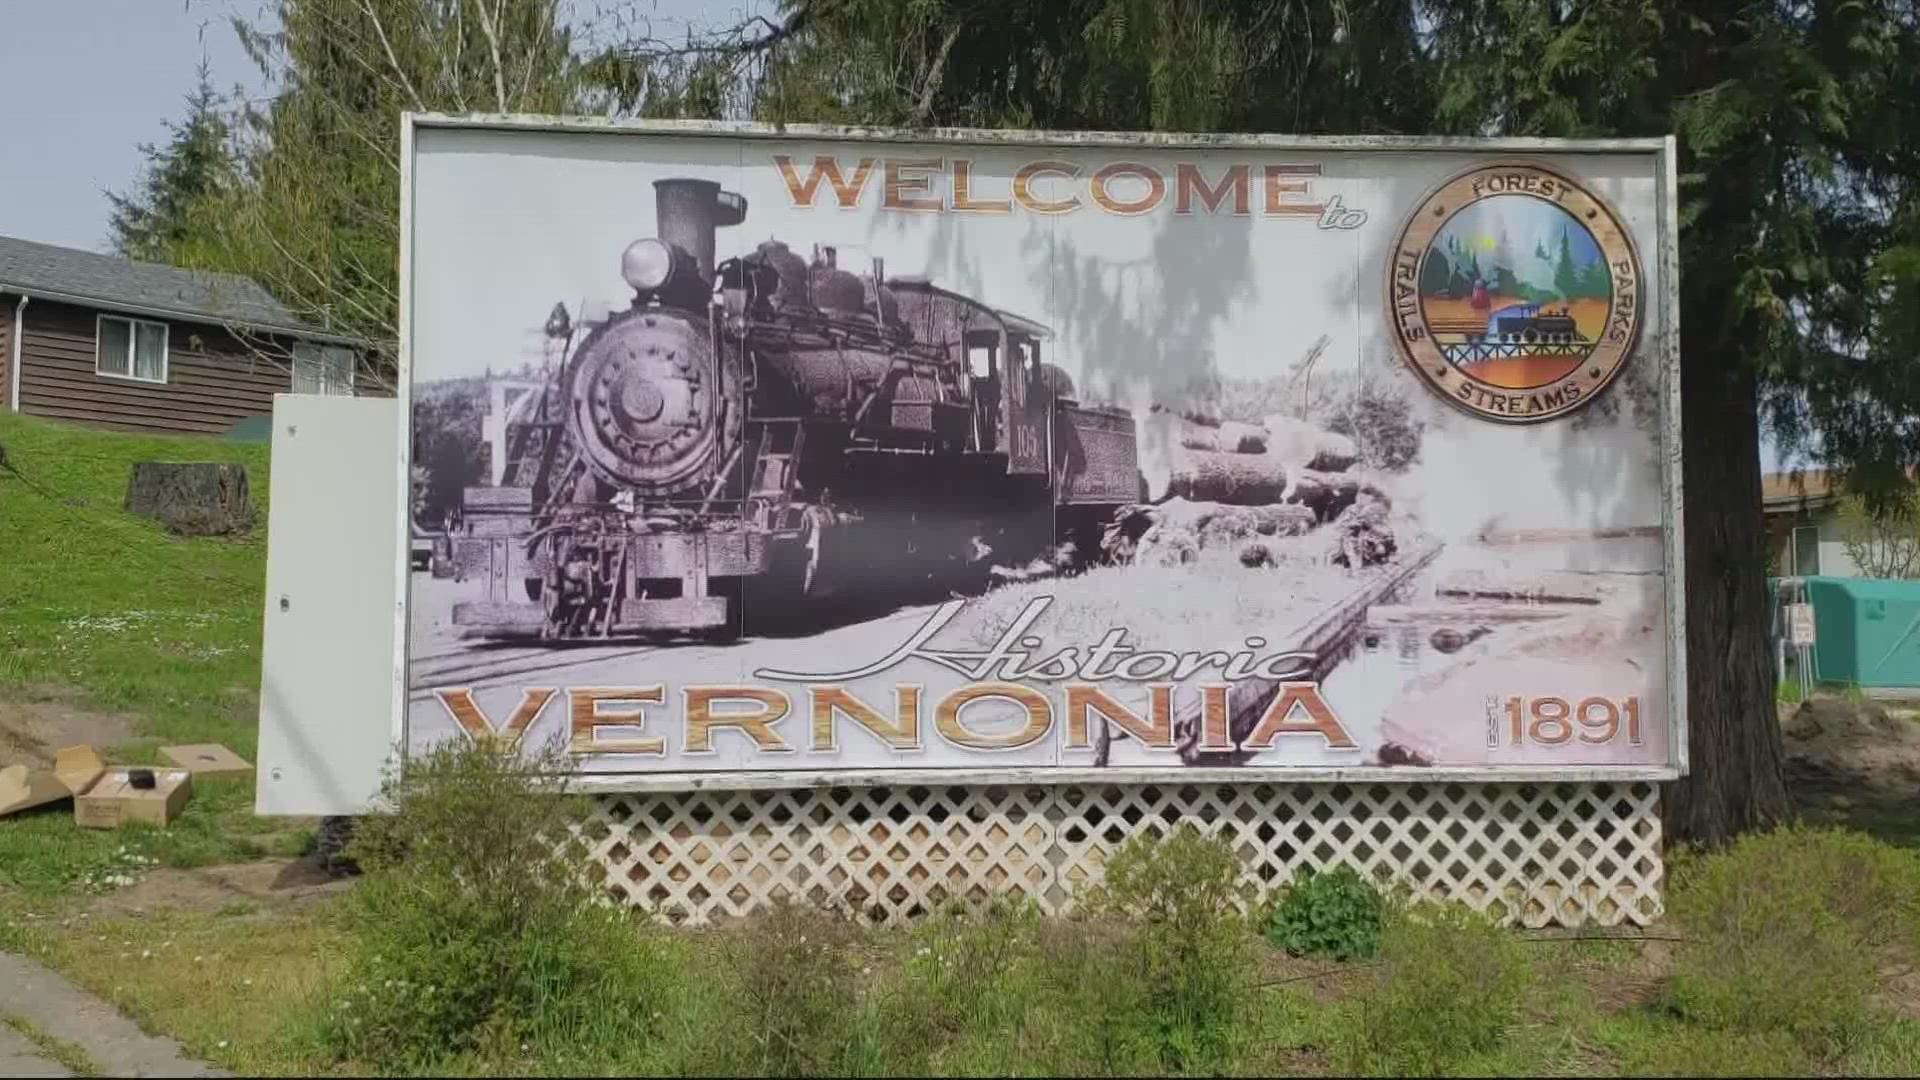 From antique shops, to a skate park, to outdoor trails with river views, there's a lot to do in Vernonia. KGW meteorologist Rod Hill explored the small Oregon town.